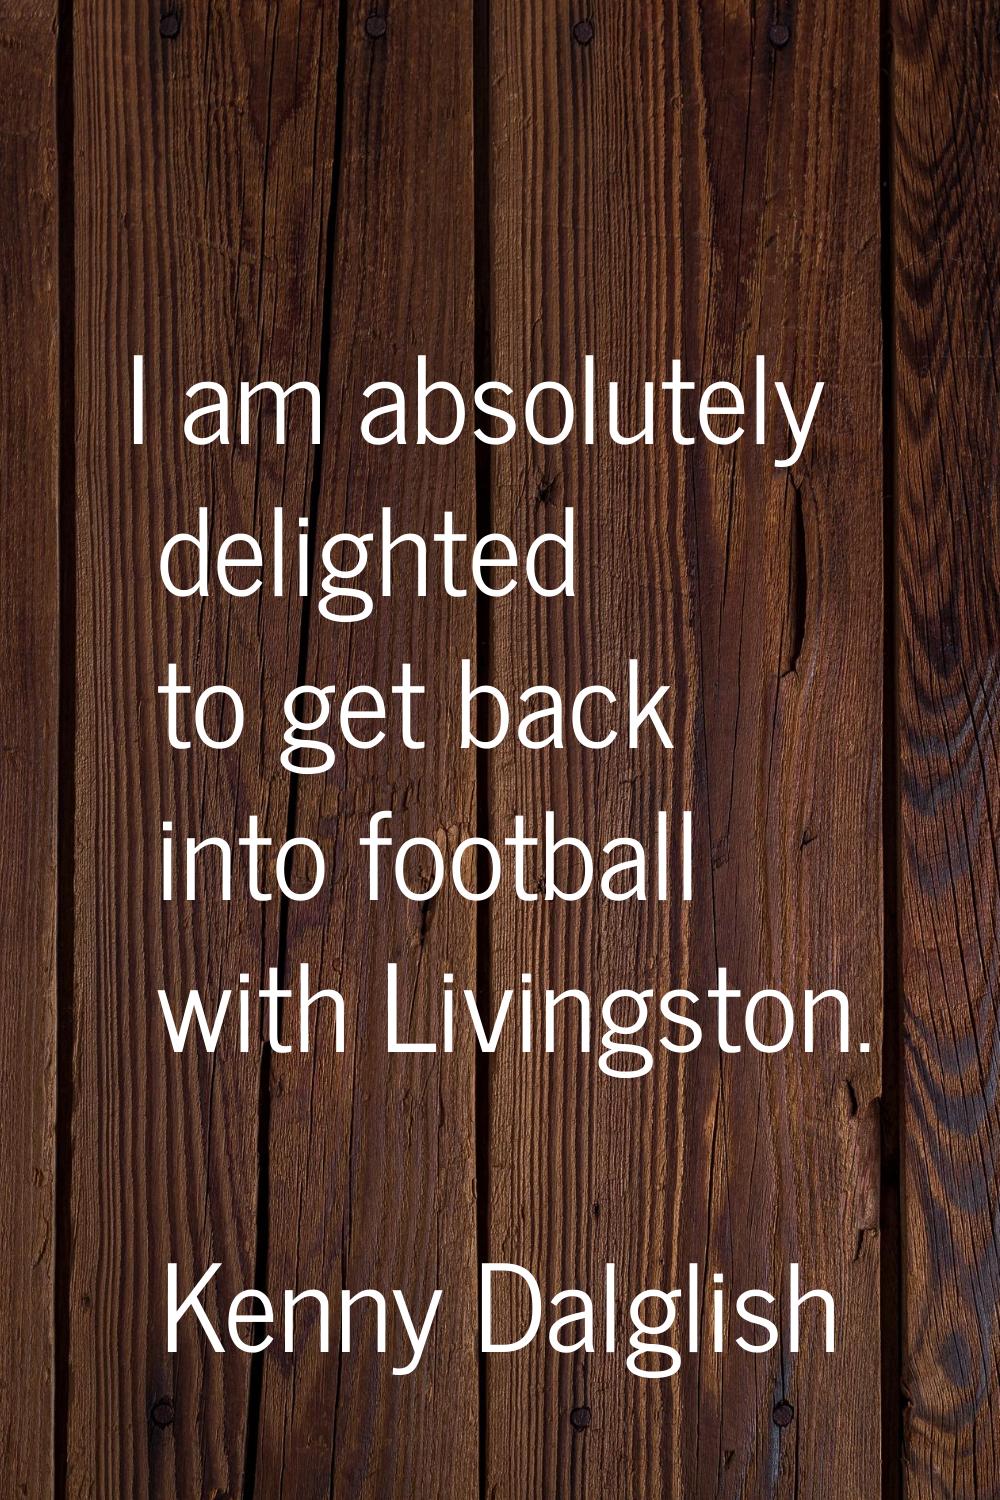 I am absolutely delighted to get back into football with Livingston.